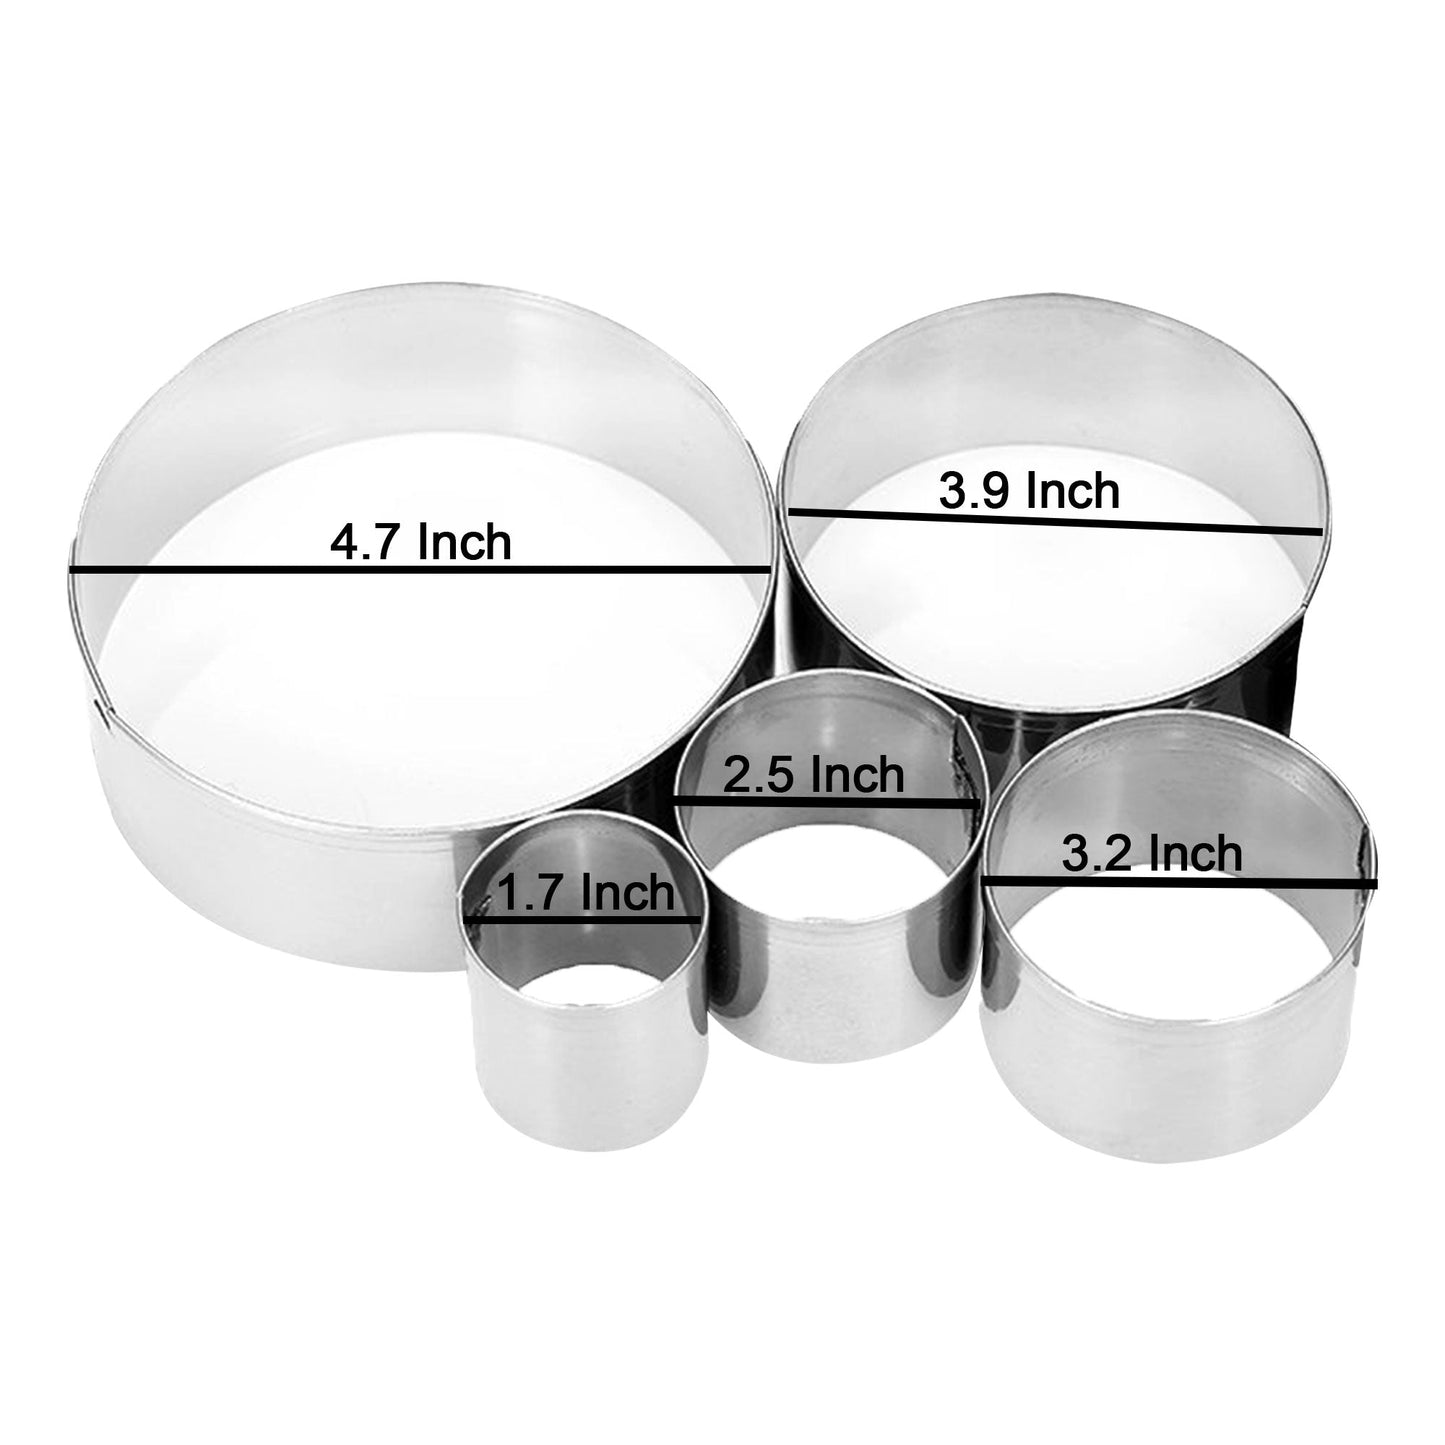 Round Cake Ring 5 Pcs Set Stainless steel Small